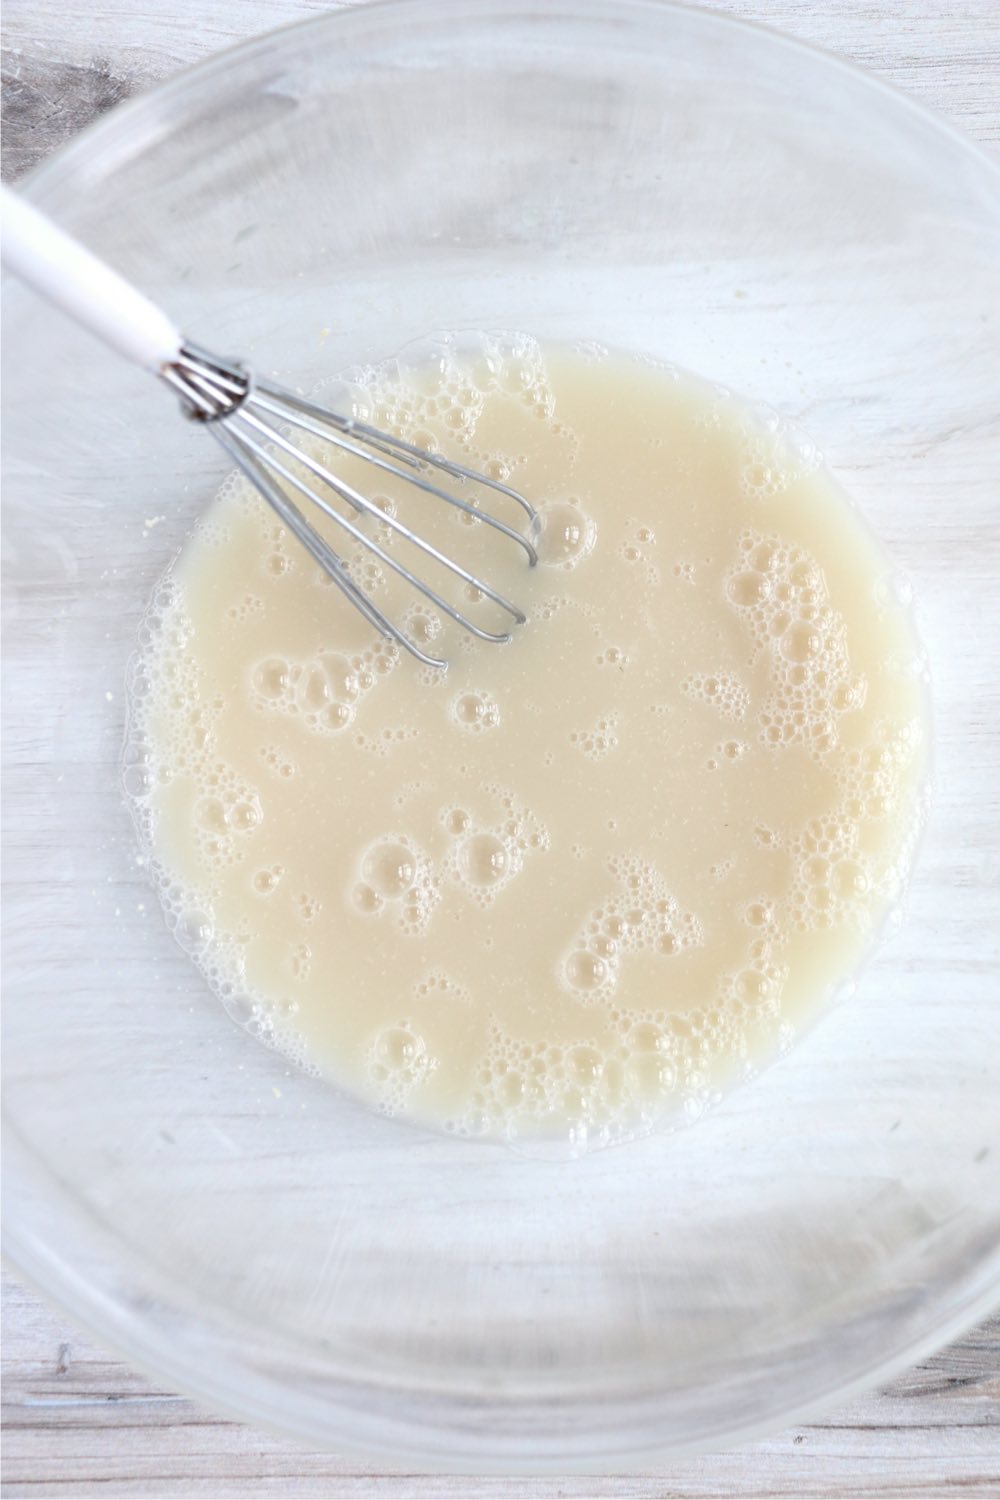 whisking yeast with water